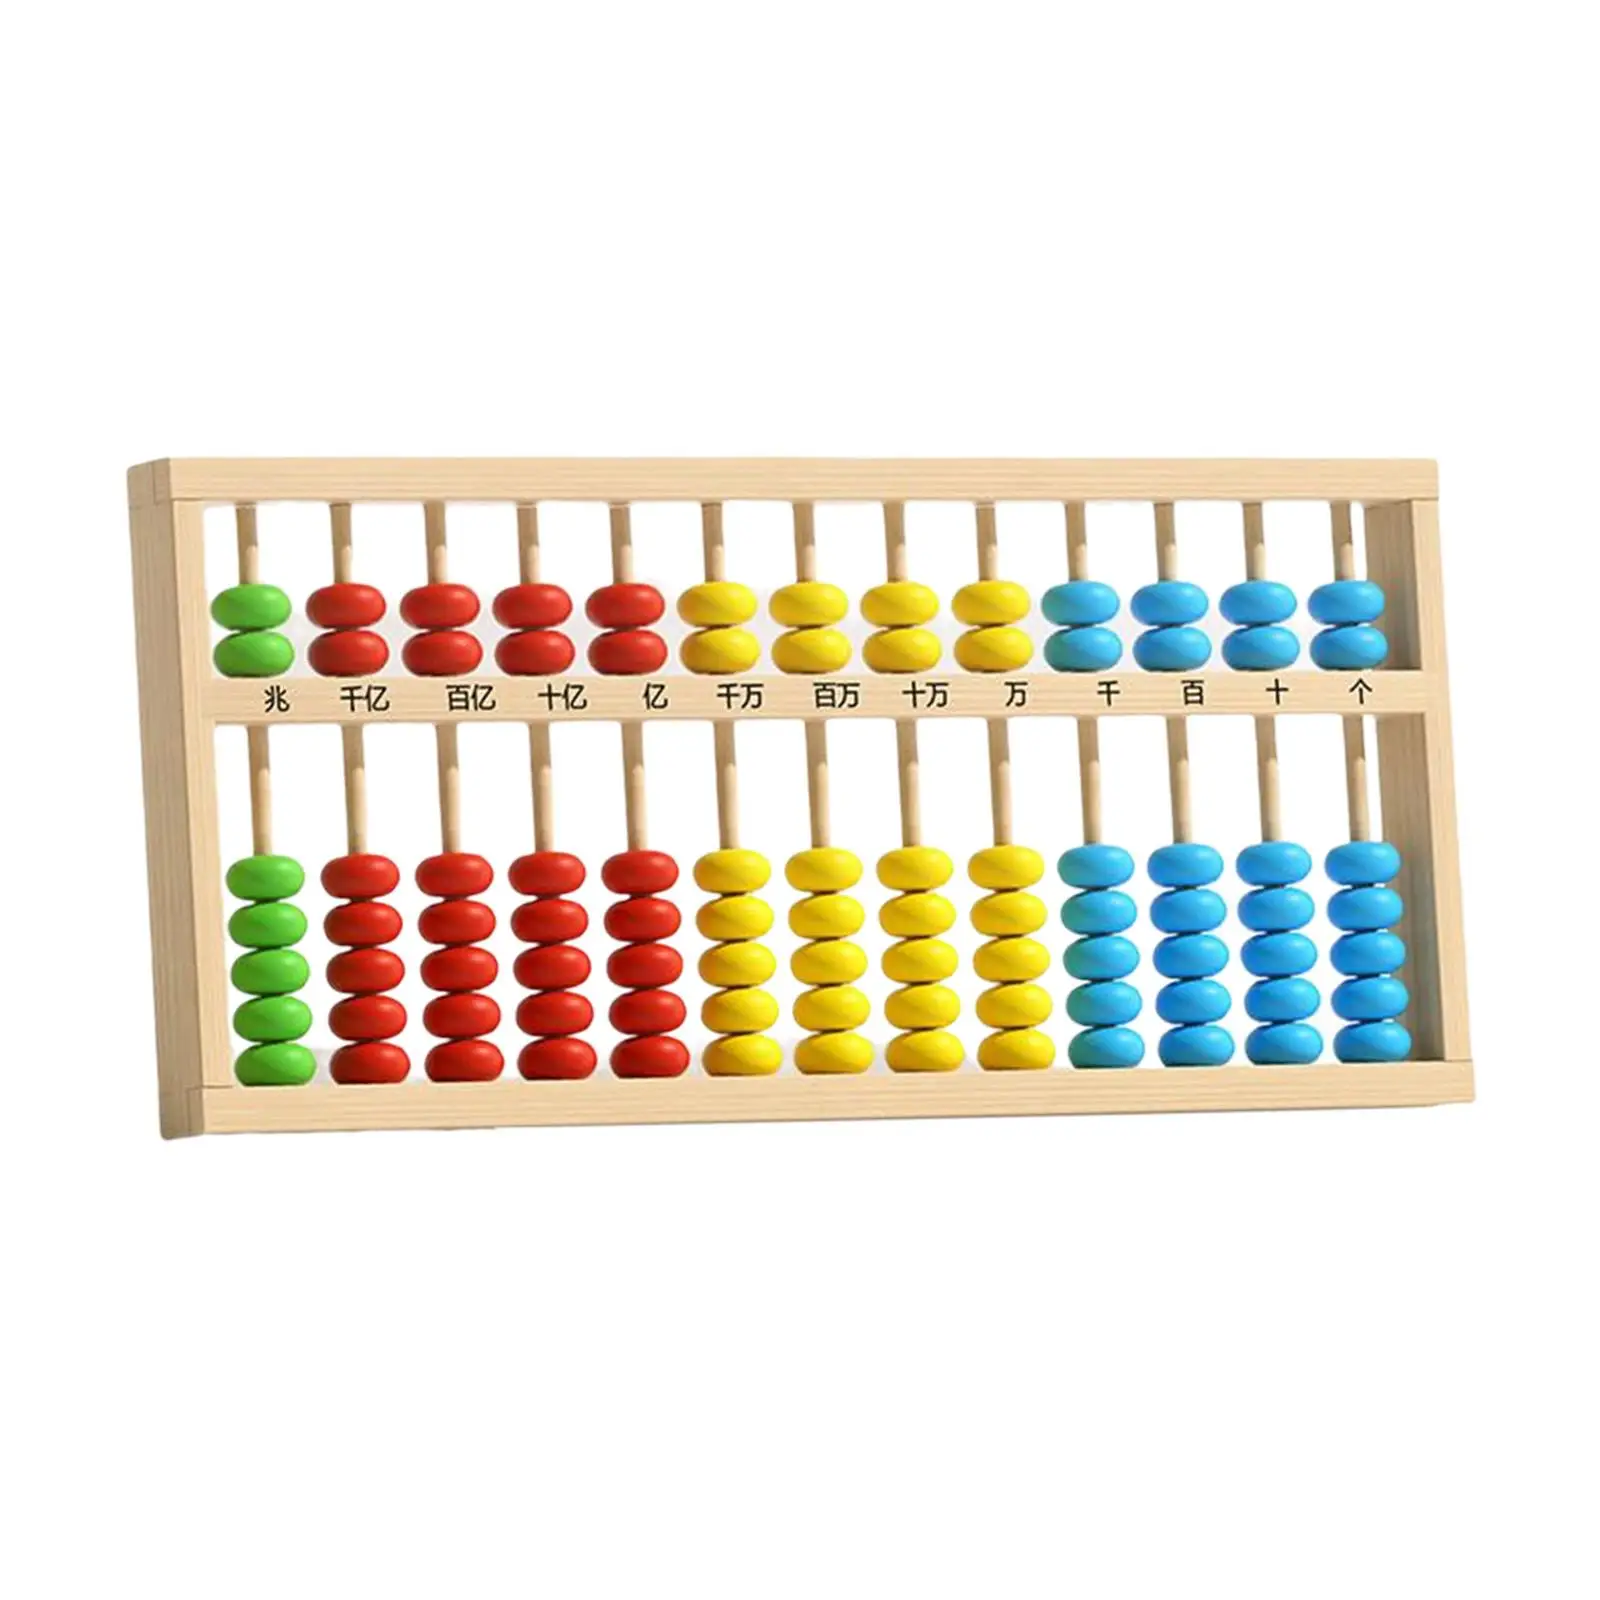 Portable Abacus Educational Toy Calculating Tool Abacus Teaching Frame Educational Math Calculation Toys for Activity Toys